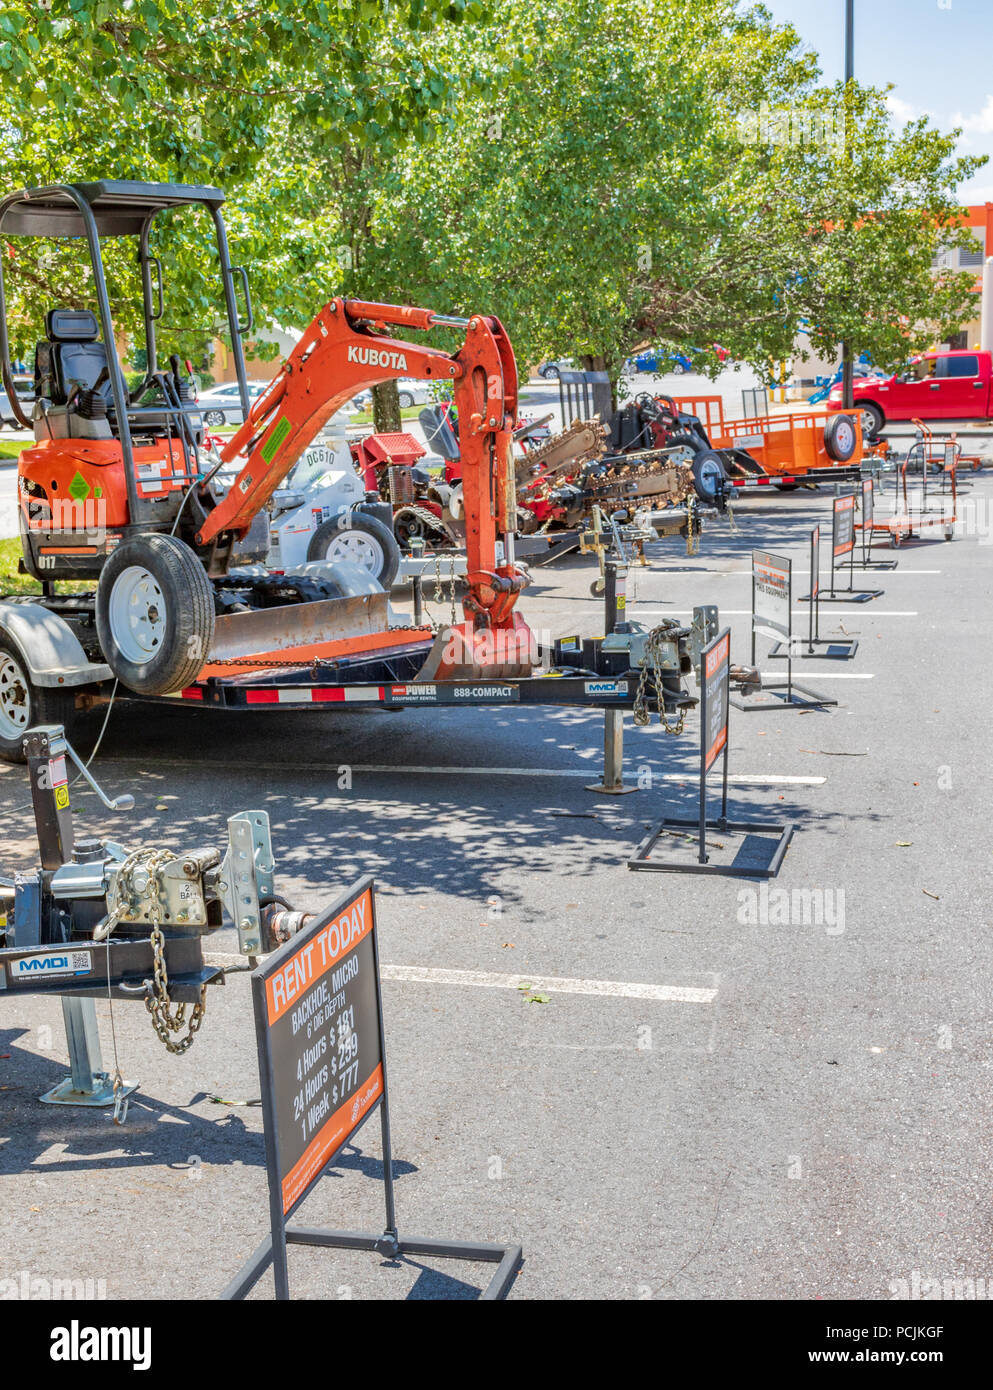 HICKORY, NC, USA-26 JULY 18: A row of equipment for rent at Home Depot, a big-box store, selling tools, remodeling and construction materials. Stock Photo